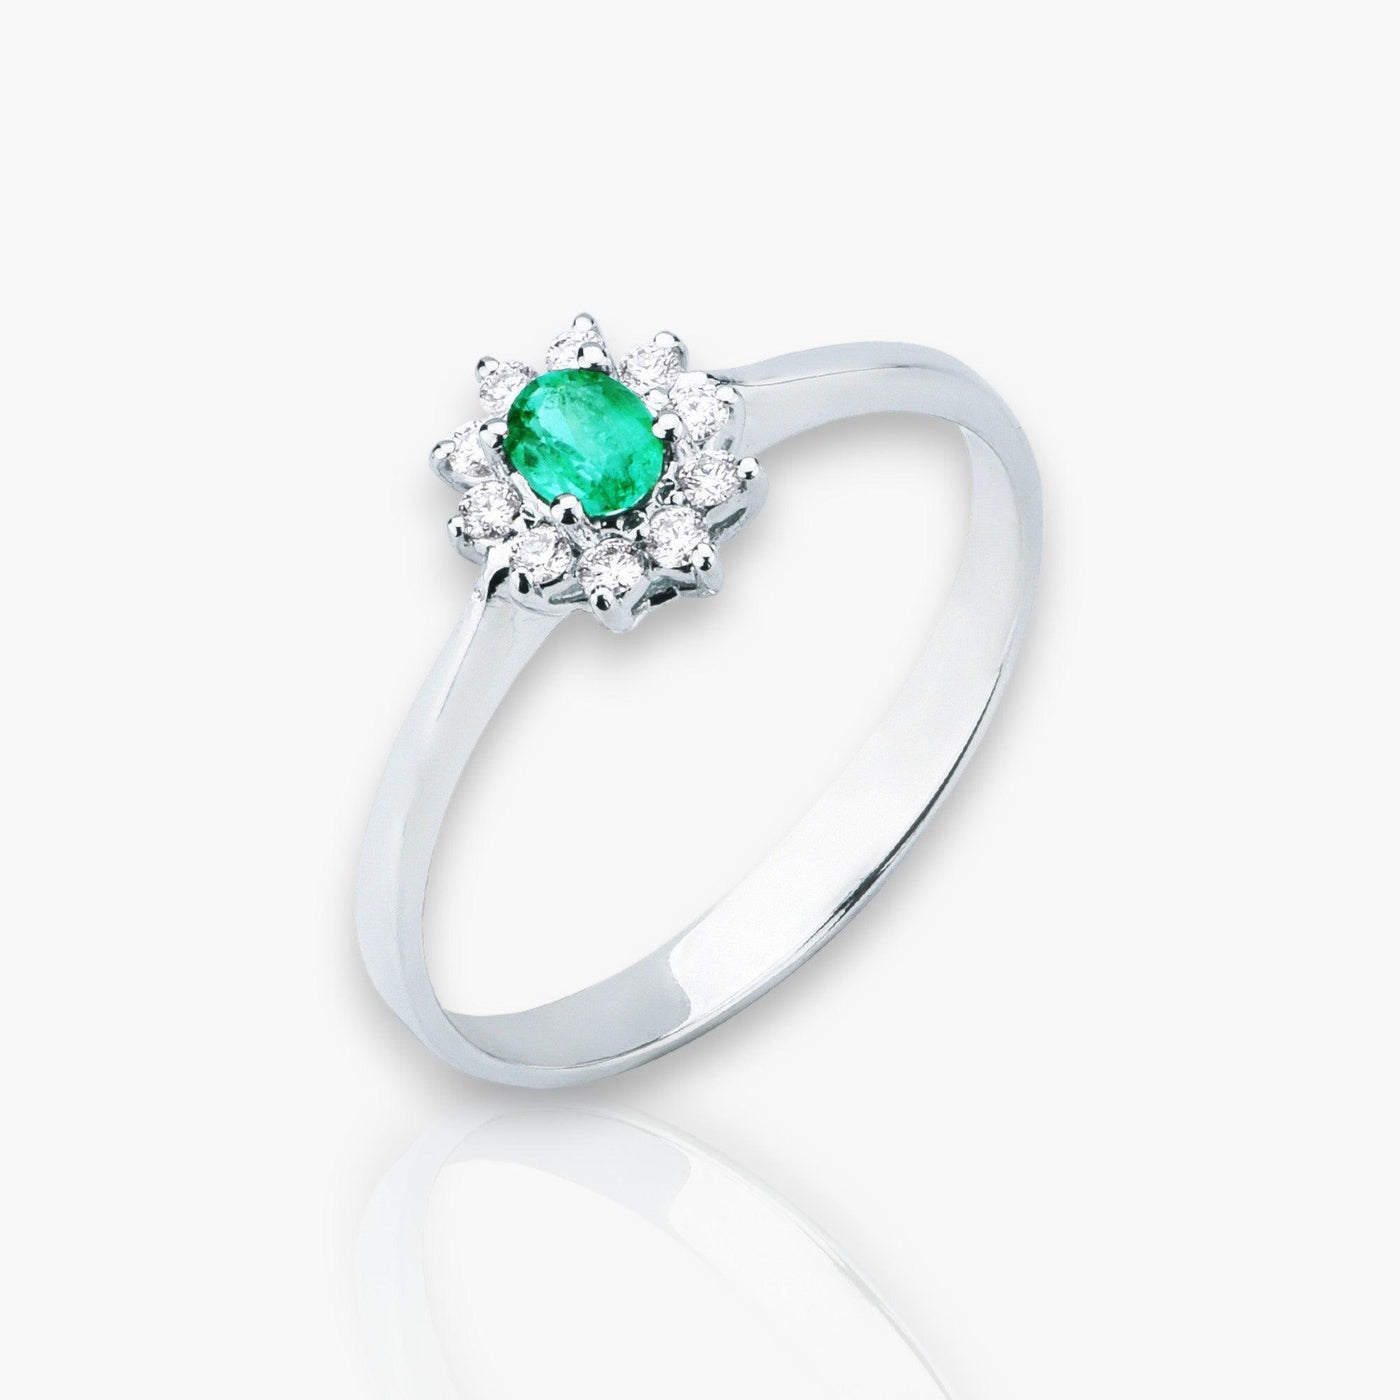 Oval Emerald Ring with Diamonds (in 3 sizes: 0.14ct - 0.78ct) - Moregola Fine Jewelry